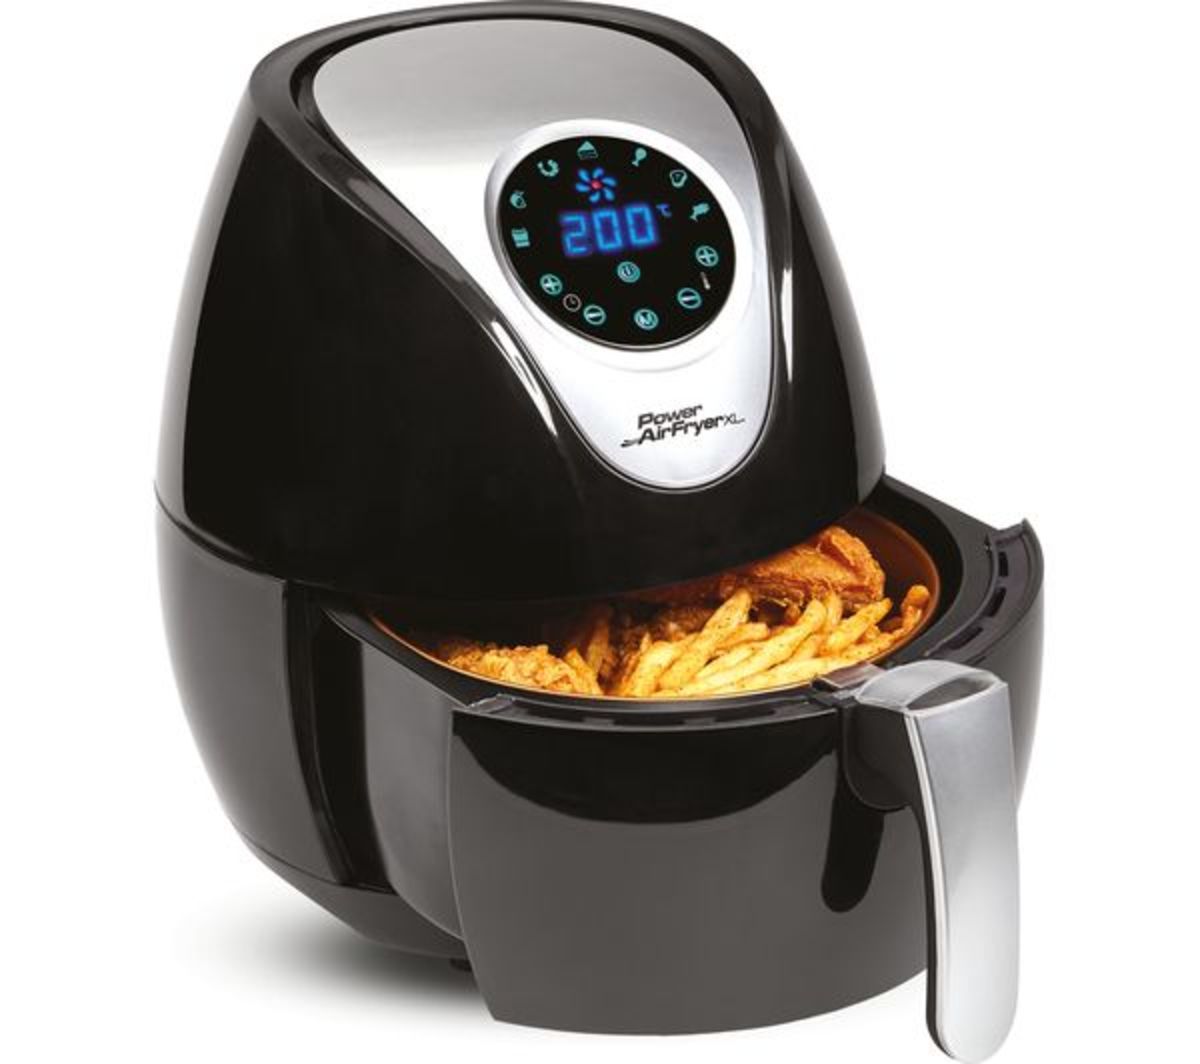 Do you have an air fryer in your kitchen? Here's why you need one.